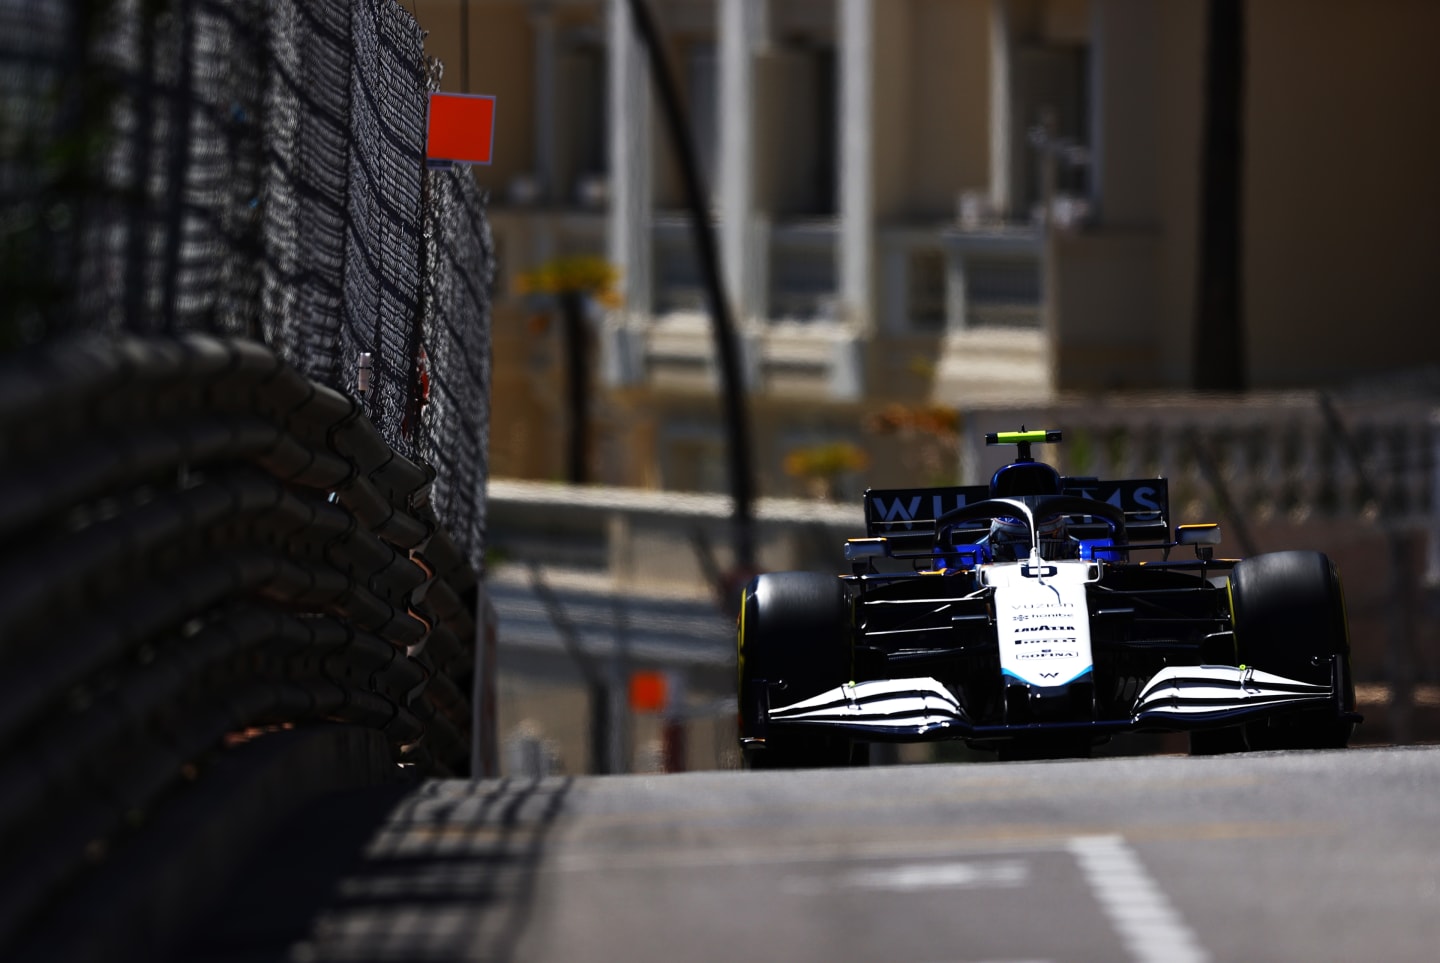 MONTE-CARLO, MONACO - MAY 20: Nicholas Latifi of Canada driving the (6) Williams Racing FW43B Mercedes on track during practice ahead of the F1 Grand Prix of Monaco at Circuit de Monaco on May 20, 2021 in Monte-Carlo, Monaco. (Photo by Bryn Lennon/Getty Images)